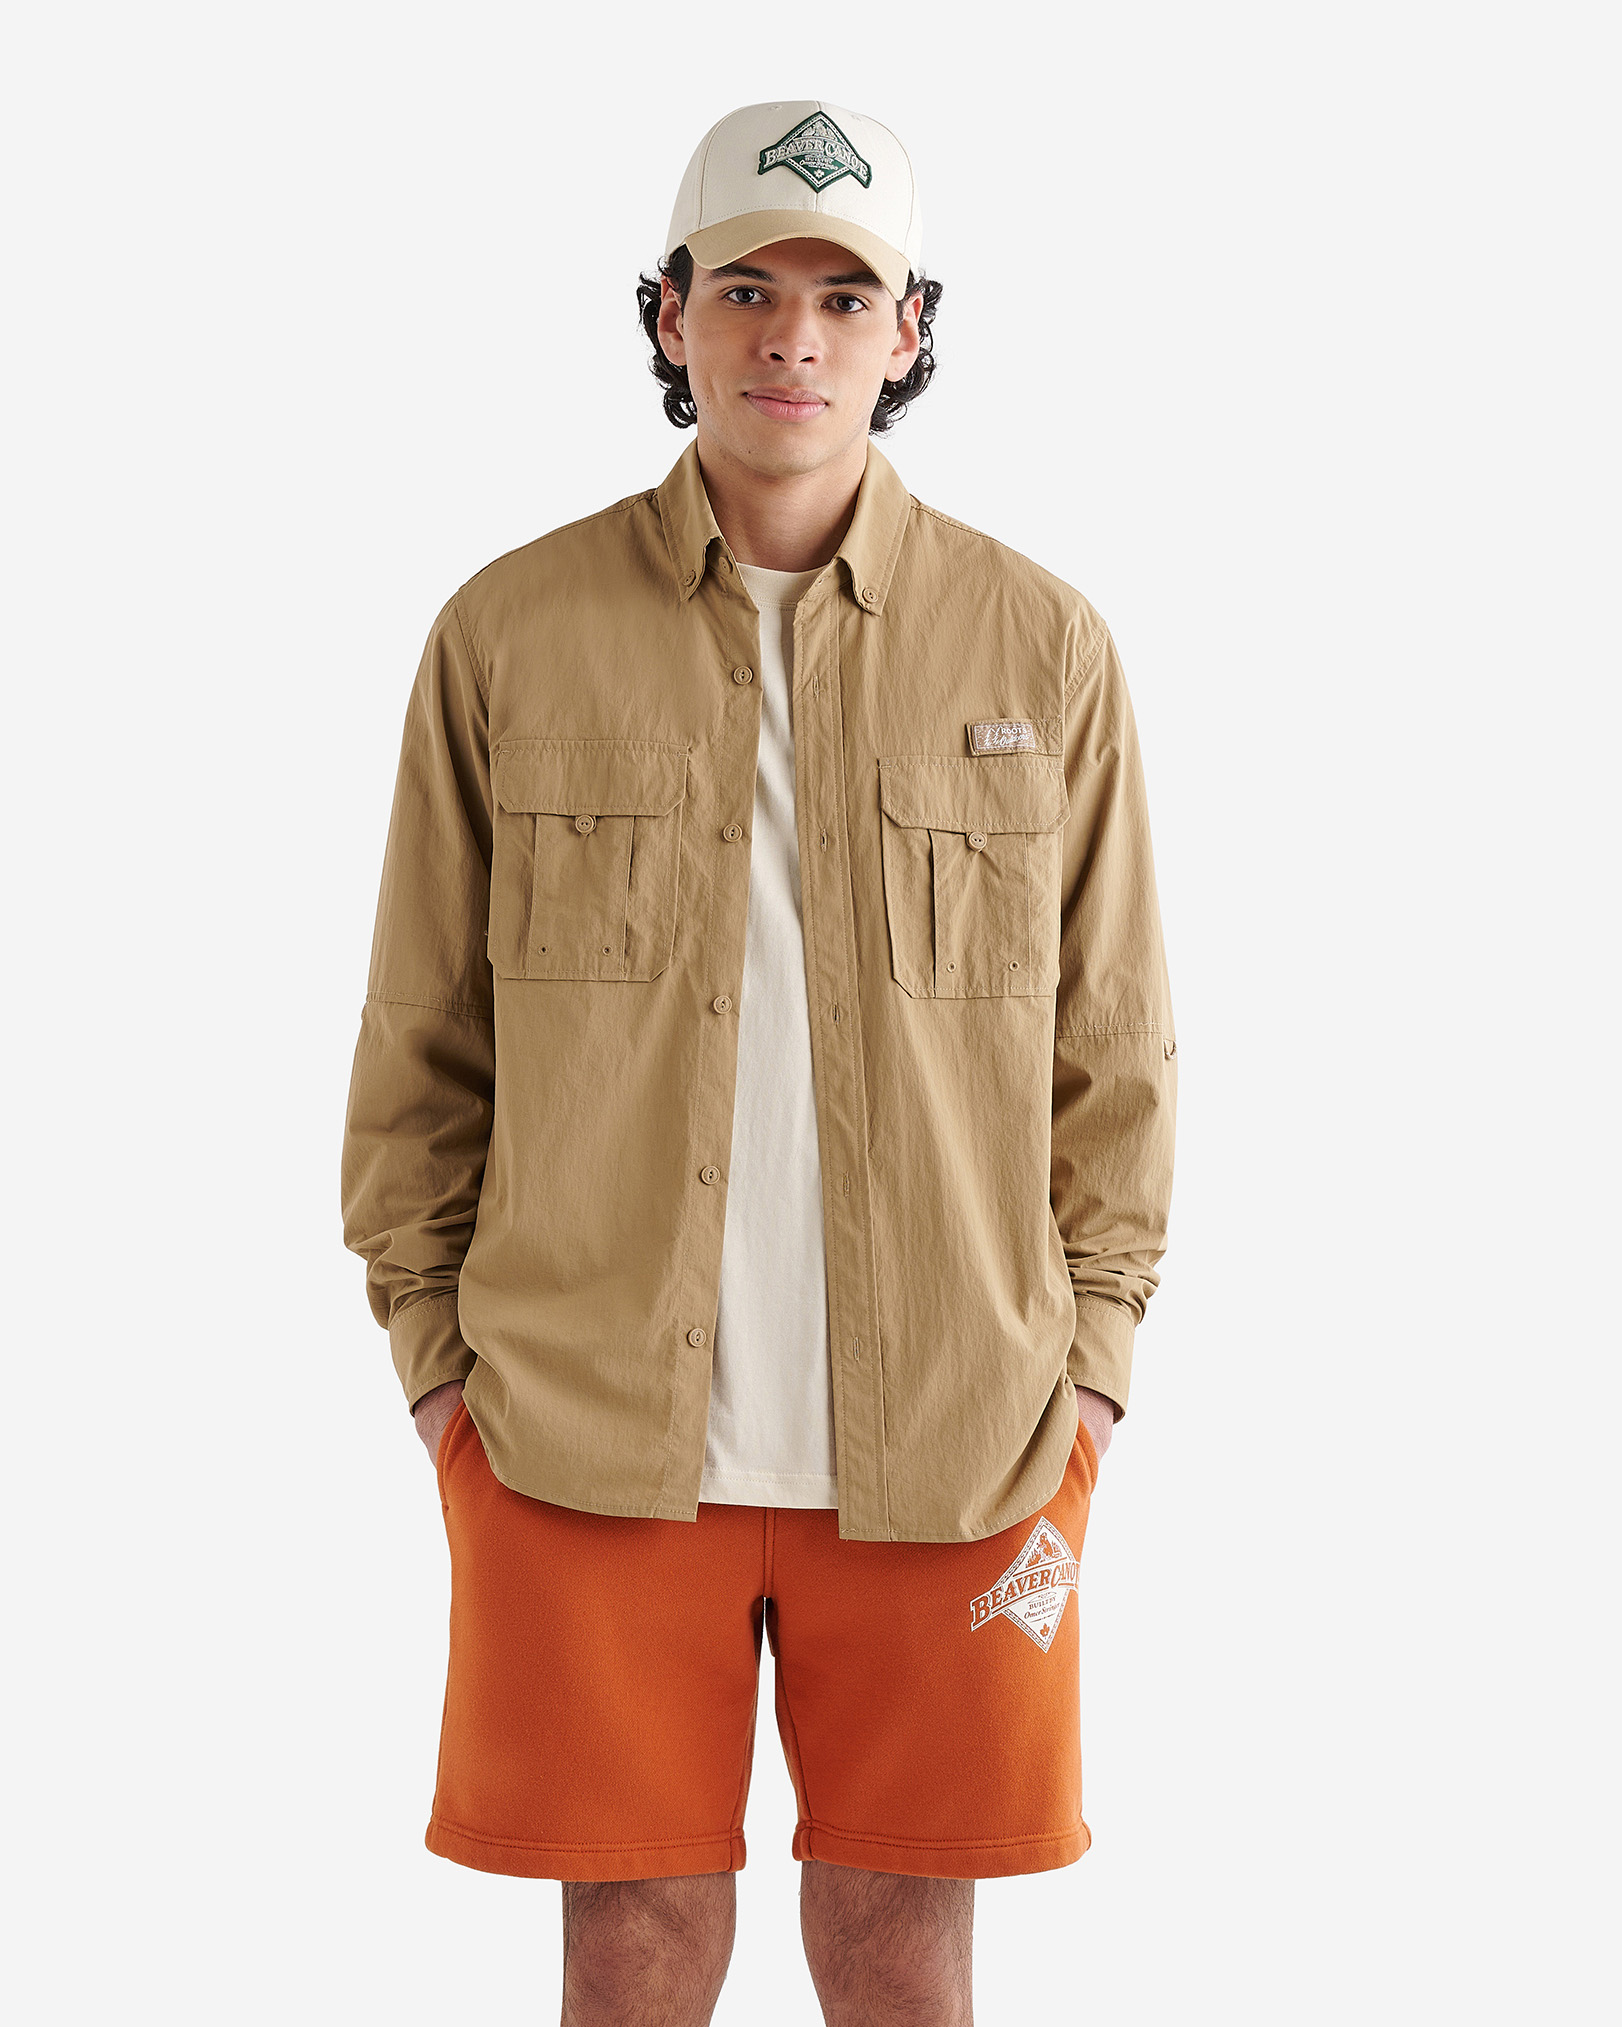 Roots Outdoor Nylon Shirt in Sepia Taupe